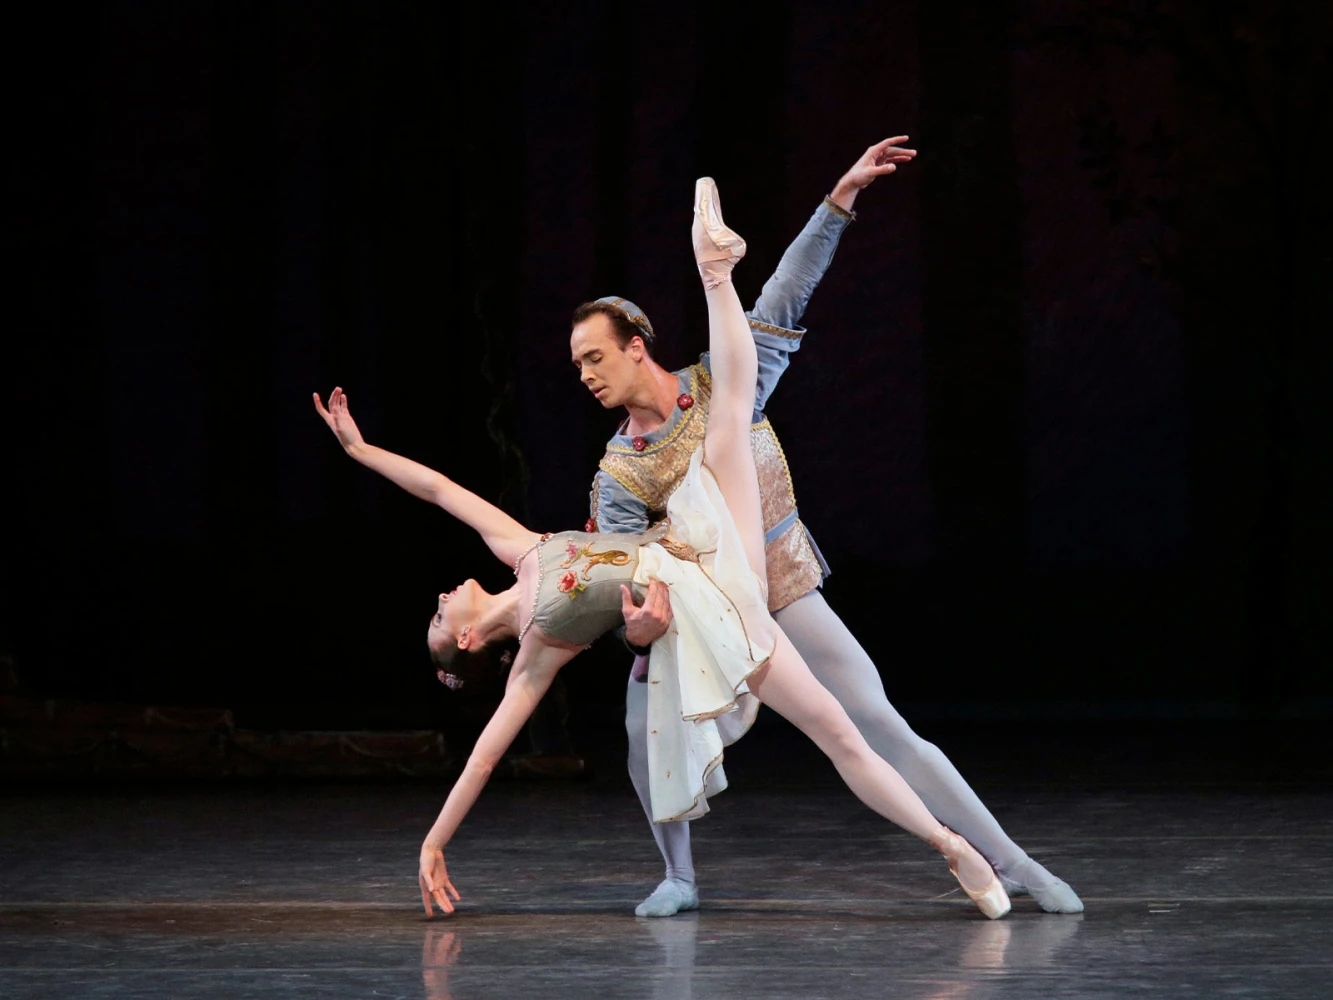 New York City Ballet: What to expect - 5